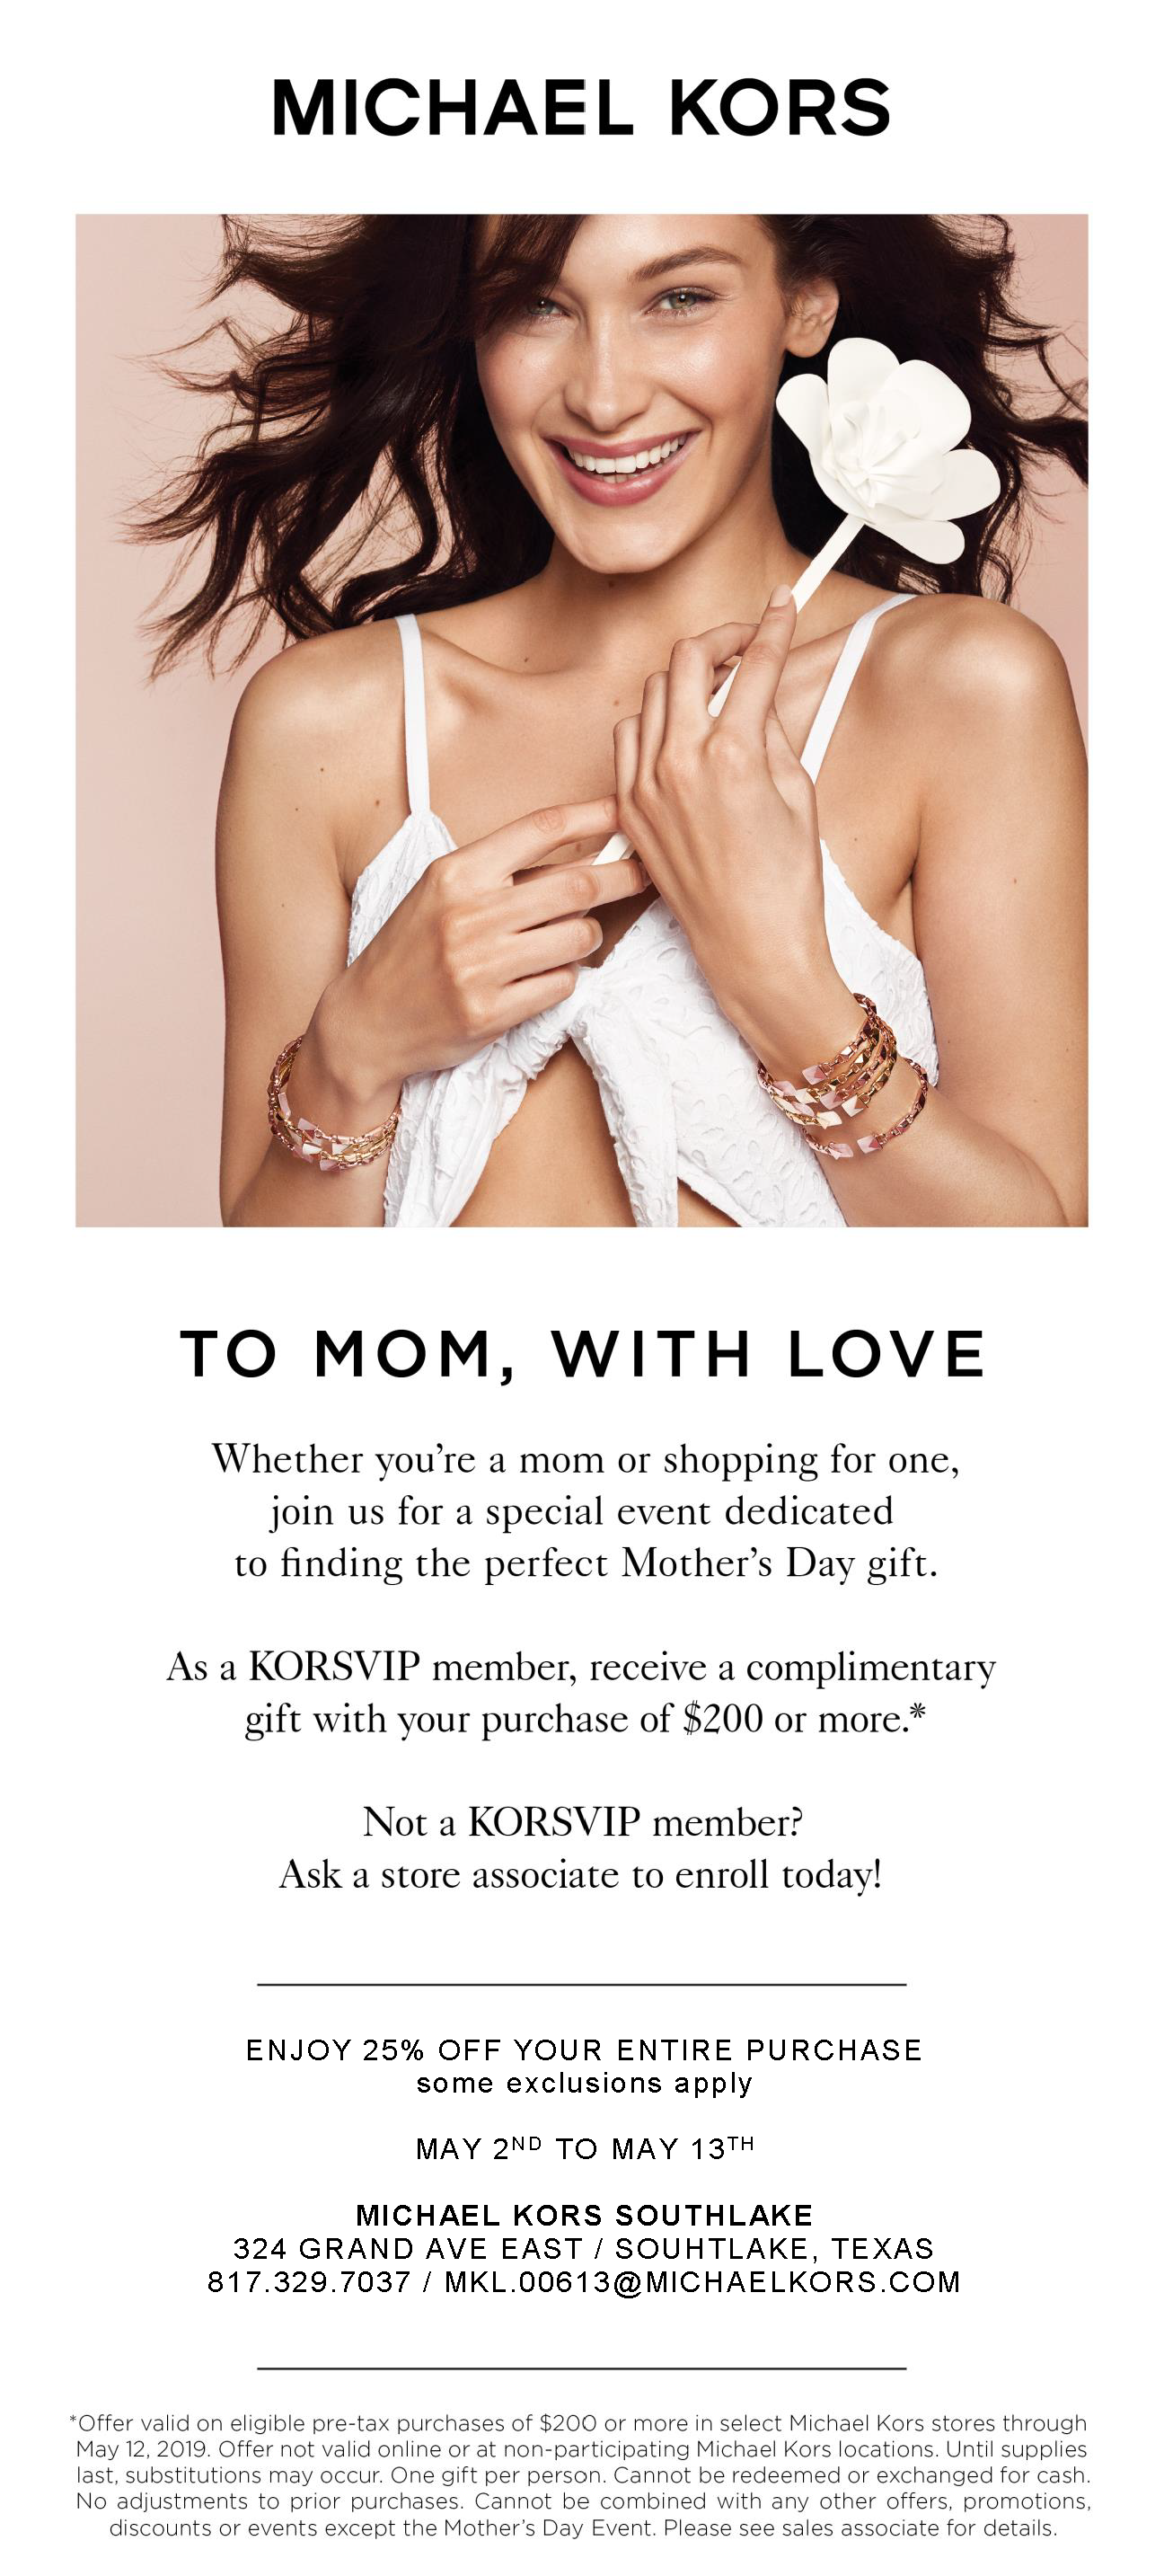 michael kors mother's day sale 2019